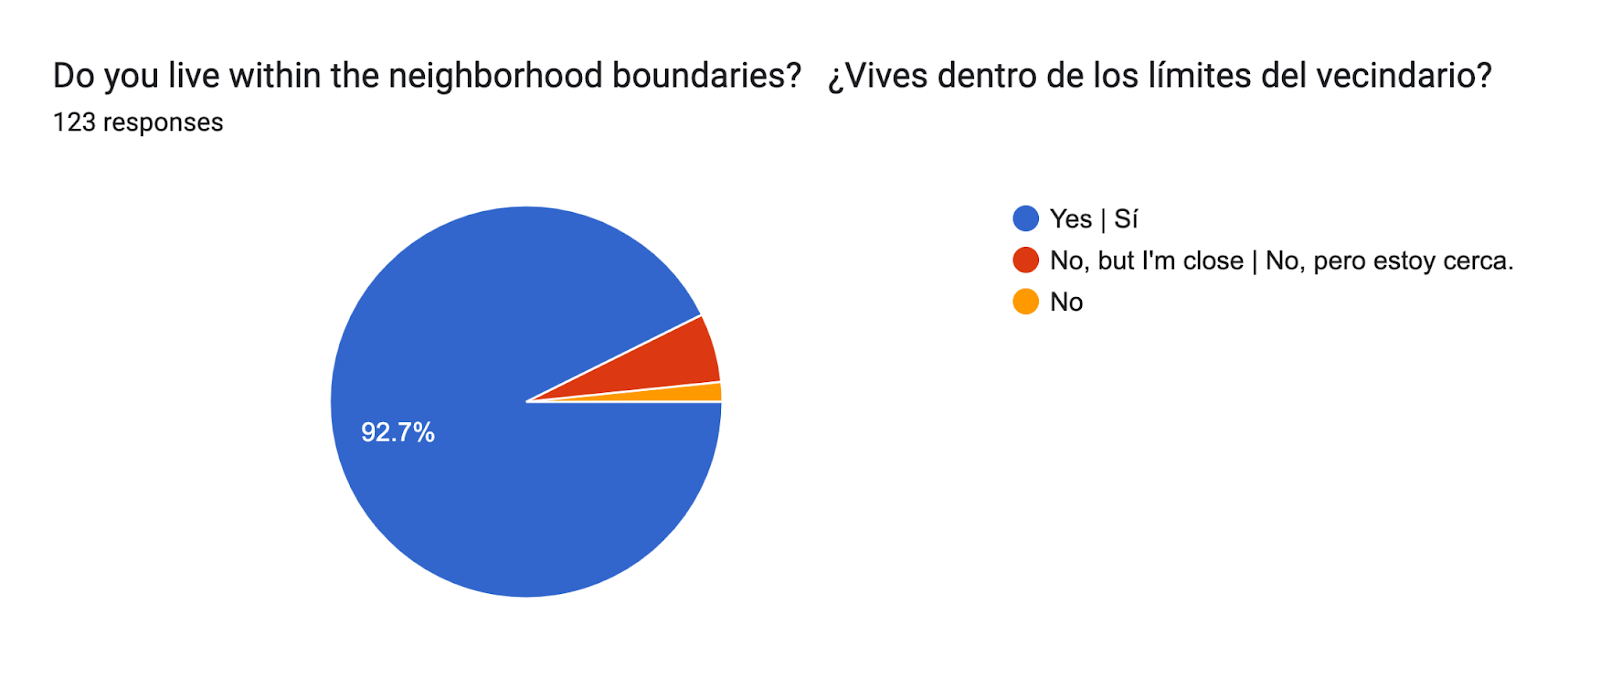 Forms response chart. Question title: Do you live within the neighborhood boundaries? 

¿Vives dentro de los límites del vecindario?. Number of responses: 123 responses.